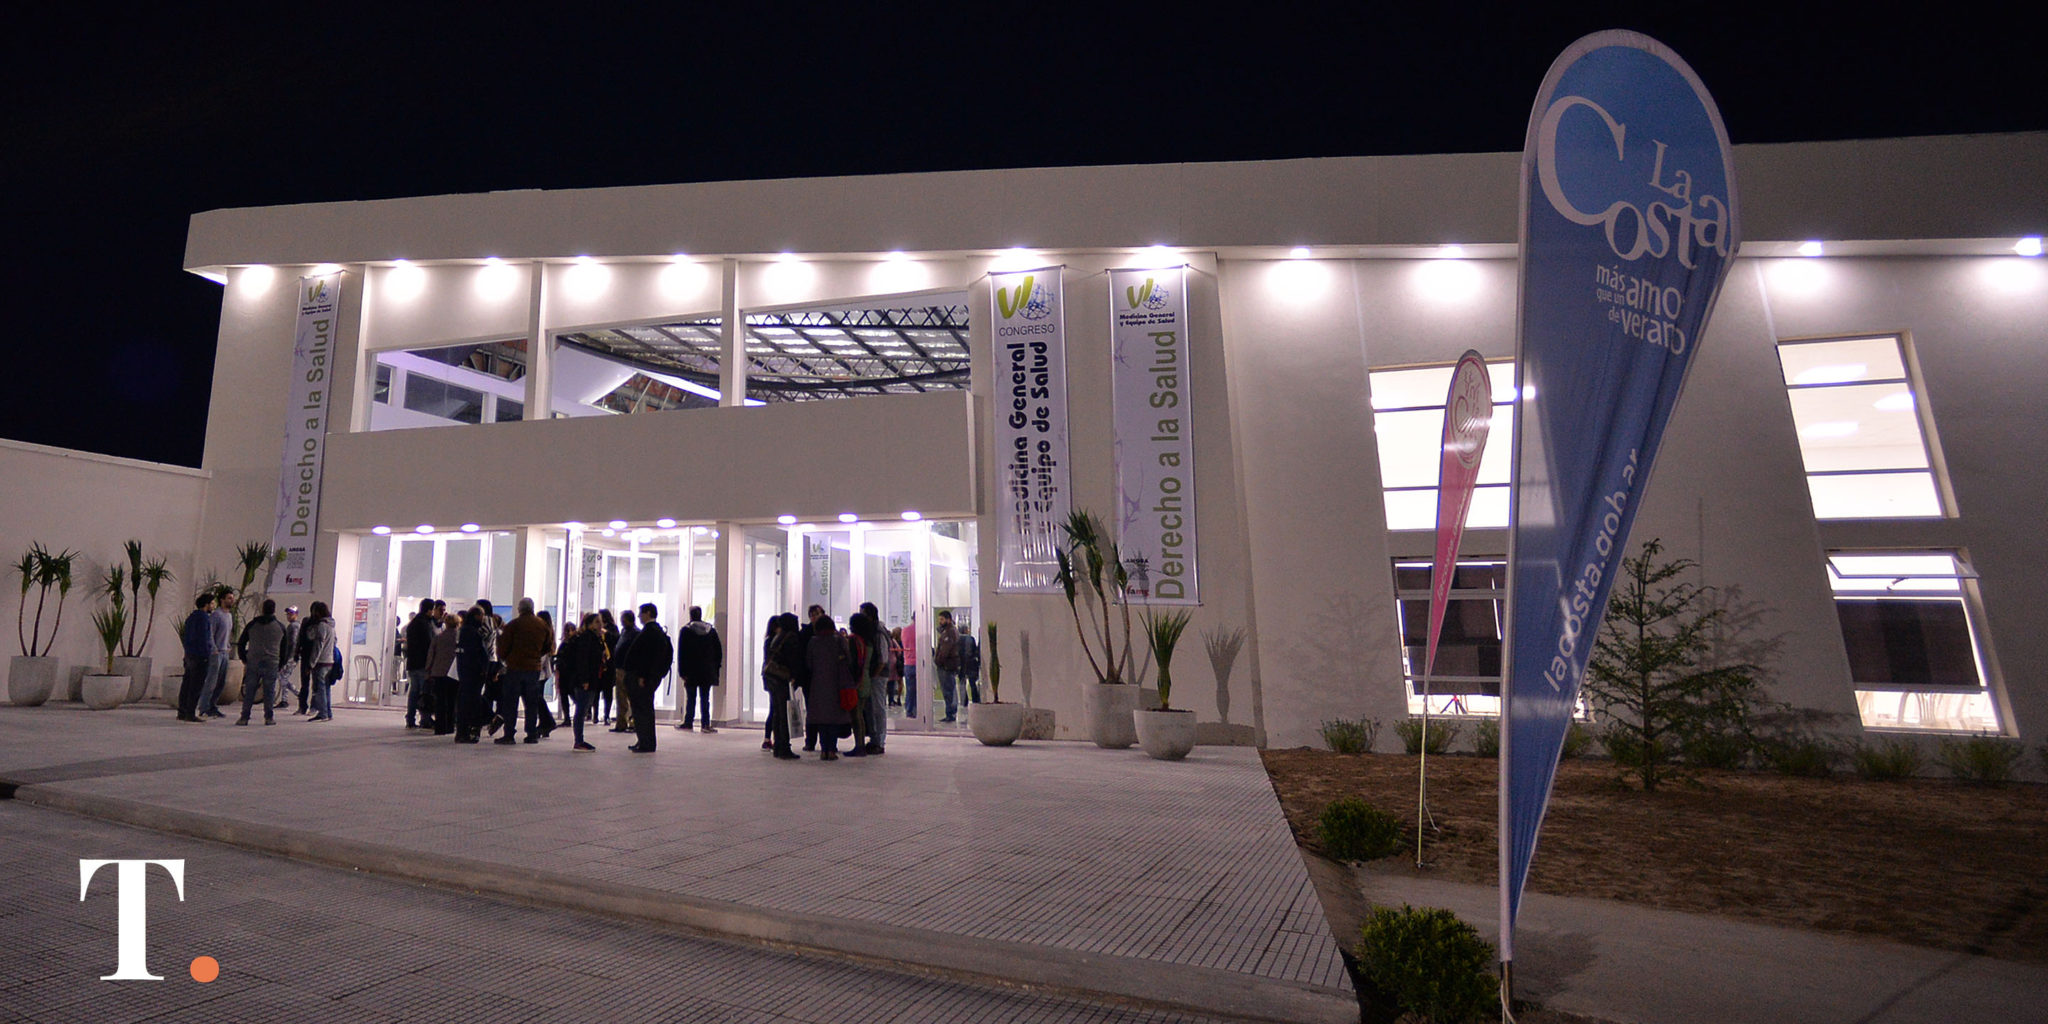 This is how the tenth congress of general medicine in Mar de Ago was scheduled